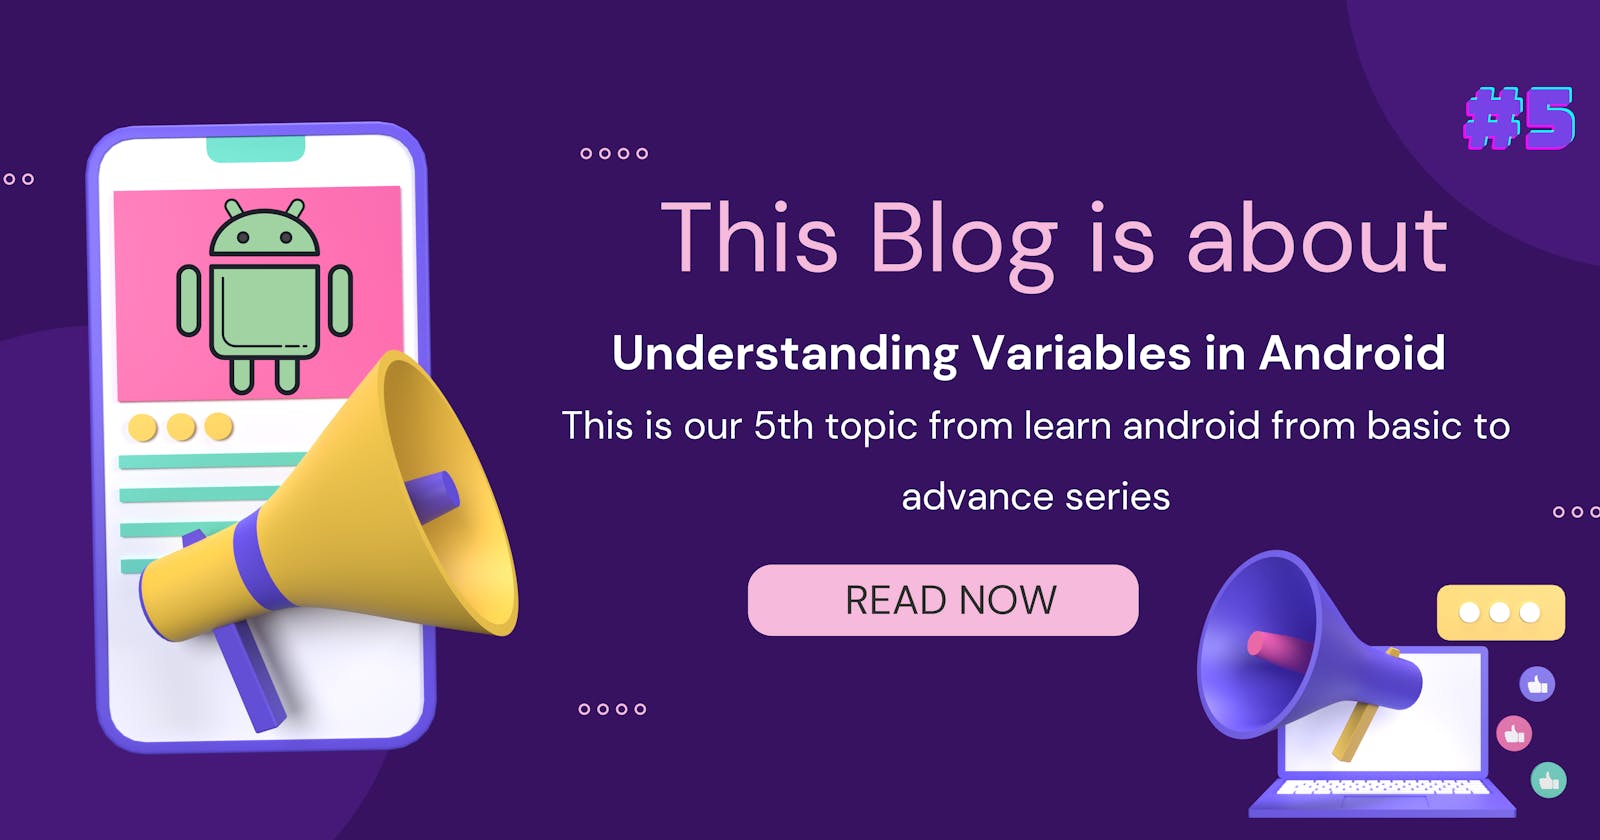 Topic: 5 Understanding Variables in Android